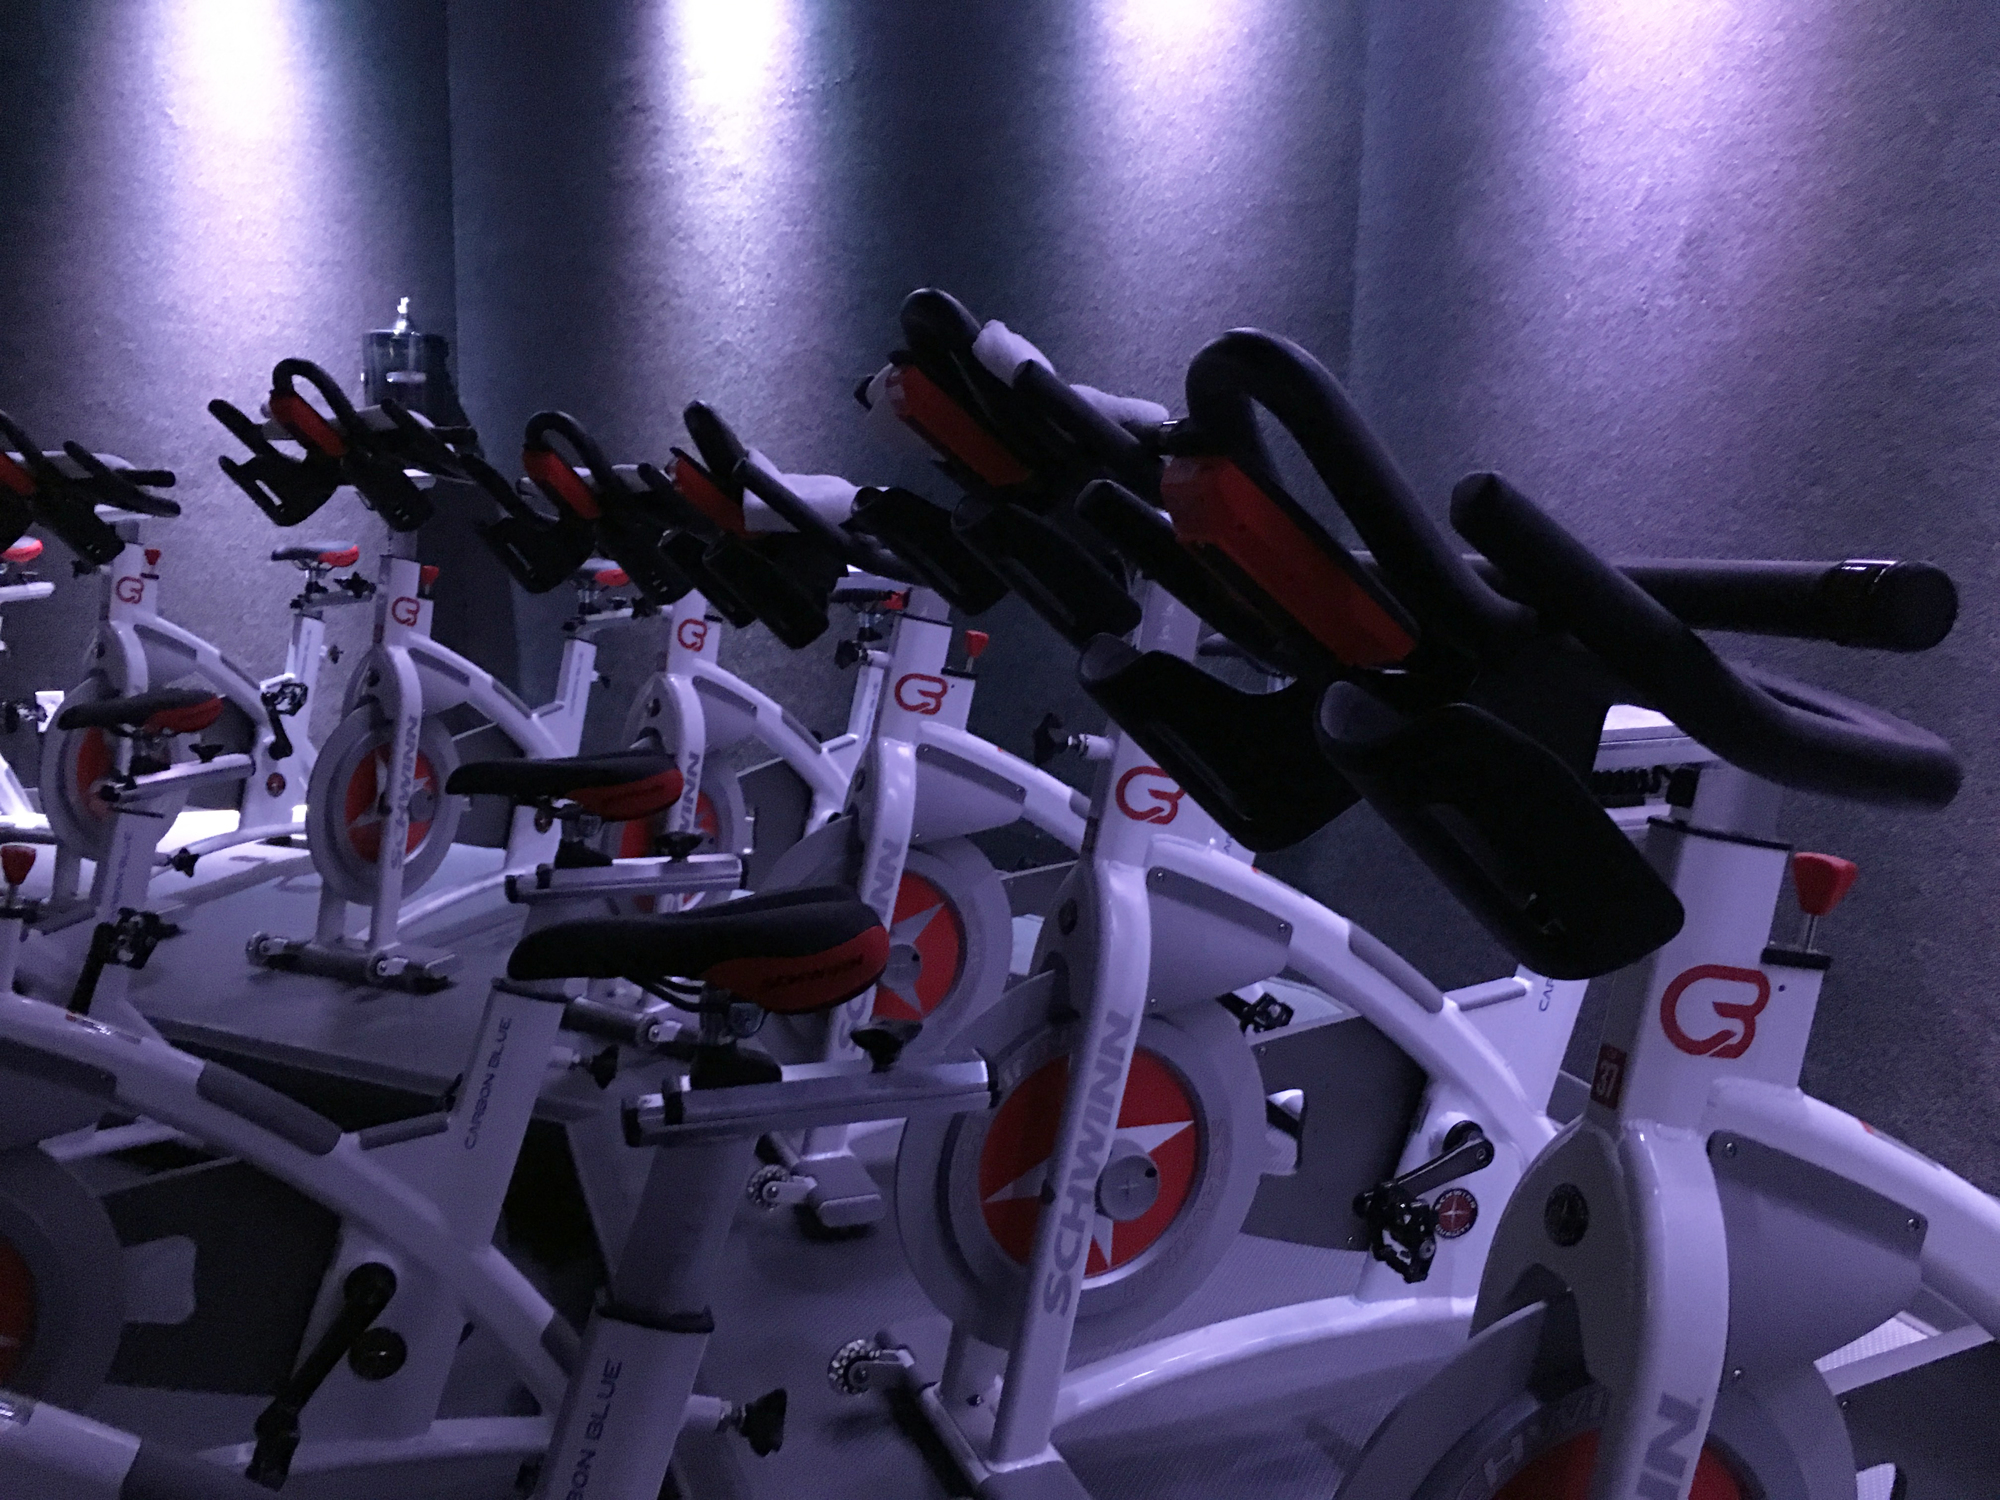 The 50 bike studio is located at 5275 University Parkway #101.